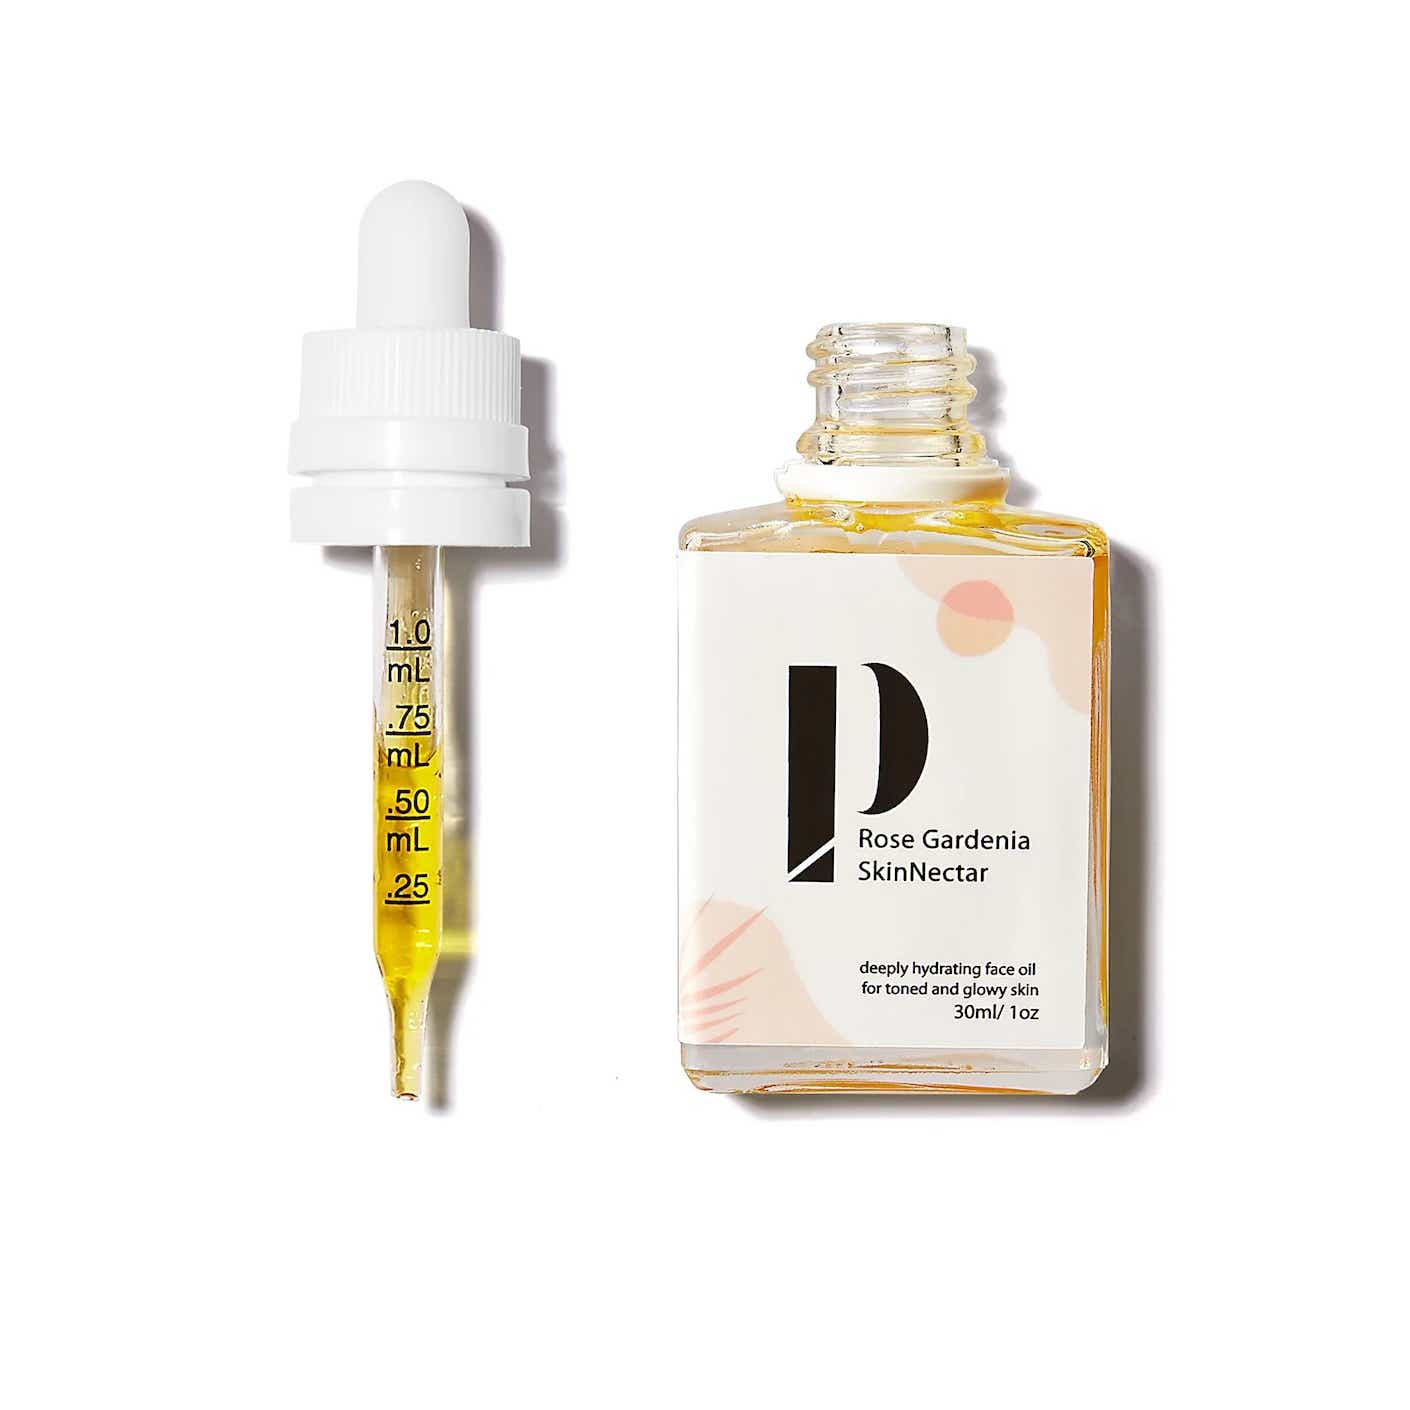 A glass square bottle of serum is pictured alongside a dropper full of the serum.